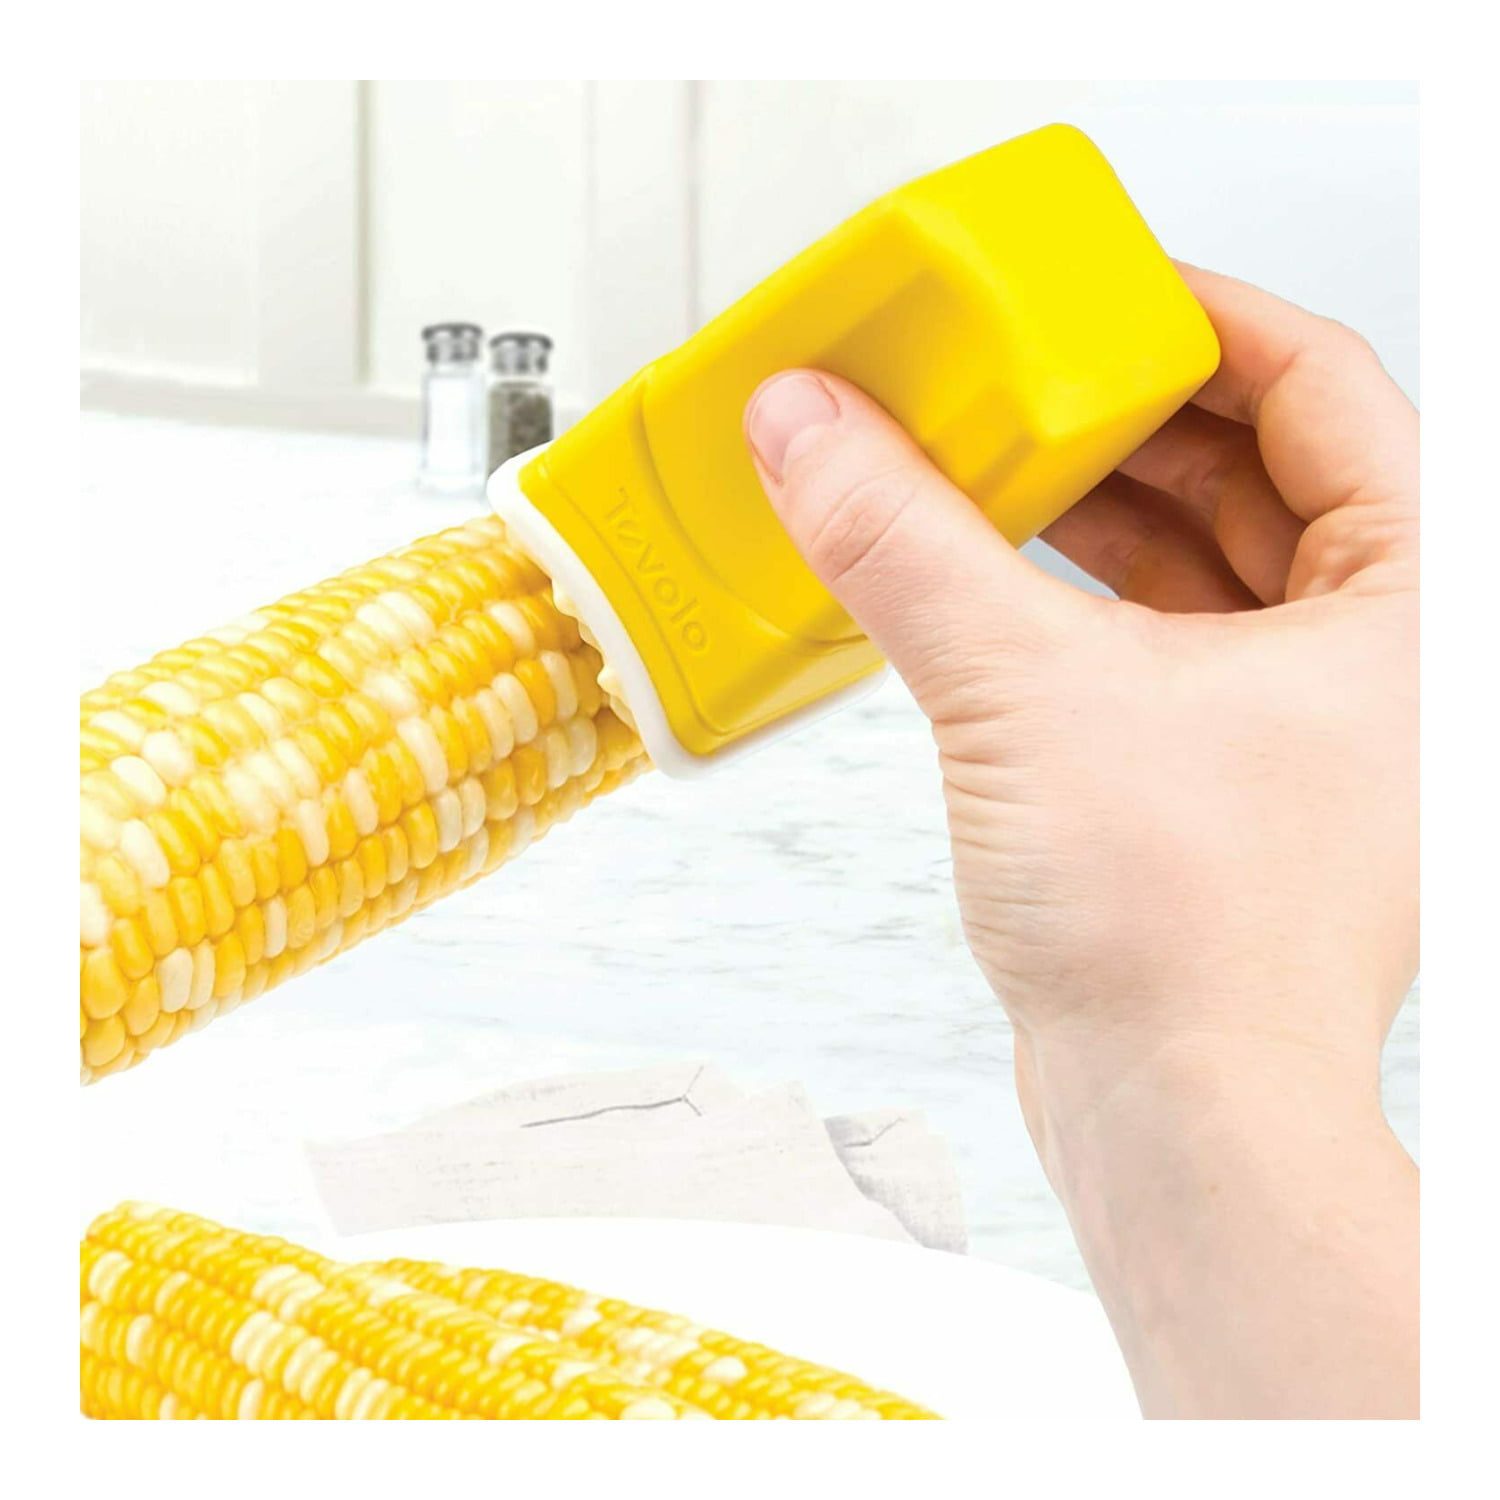 Bundle Silicone Butter Sleeve, Corn Tray, Corn Picks and Silicone Nylon Corn Tongs 4 Items Tovolo All-in-One Summer Corn Serving Set